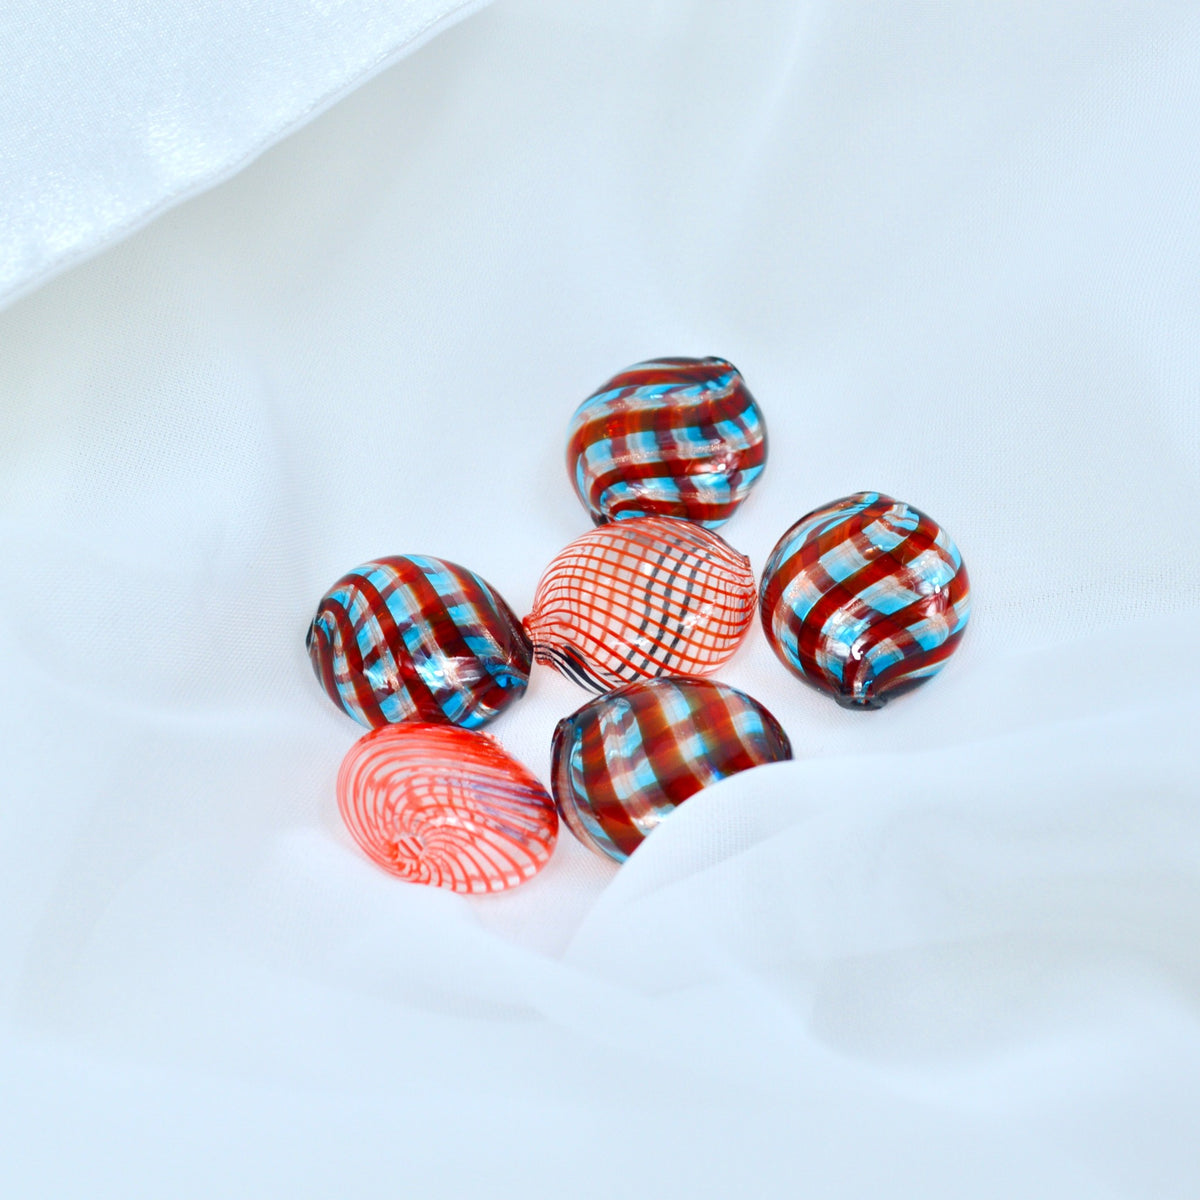 Murano Glass Blown Filigrana Penny Beads, Red or Blue, Made in Italy - My Italian Decor